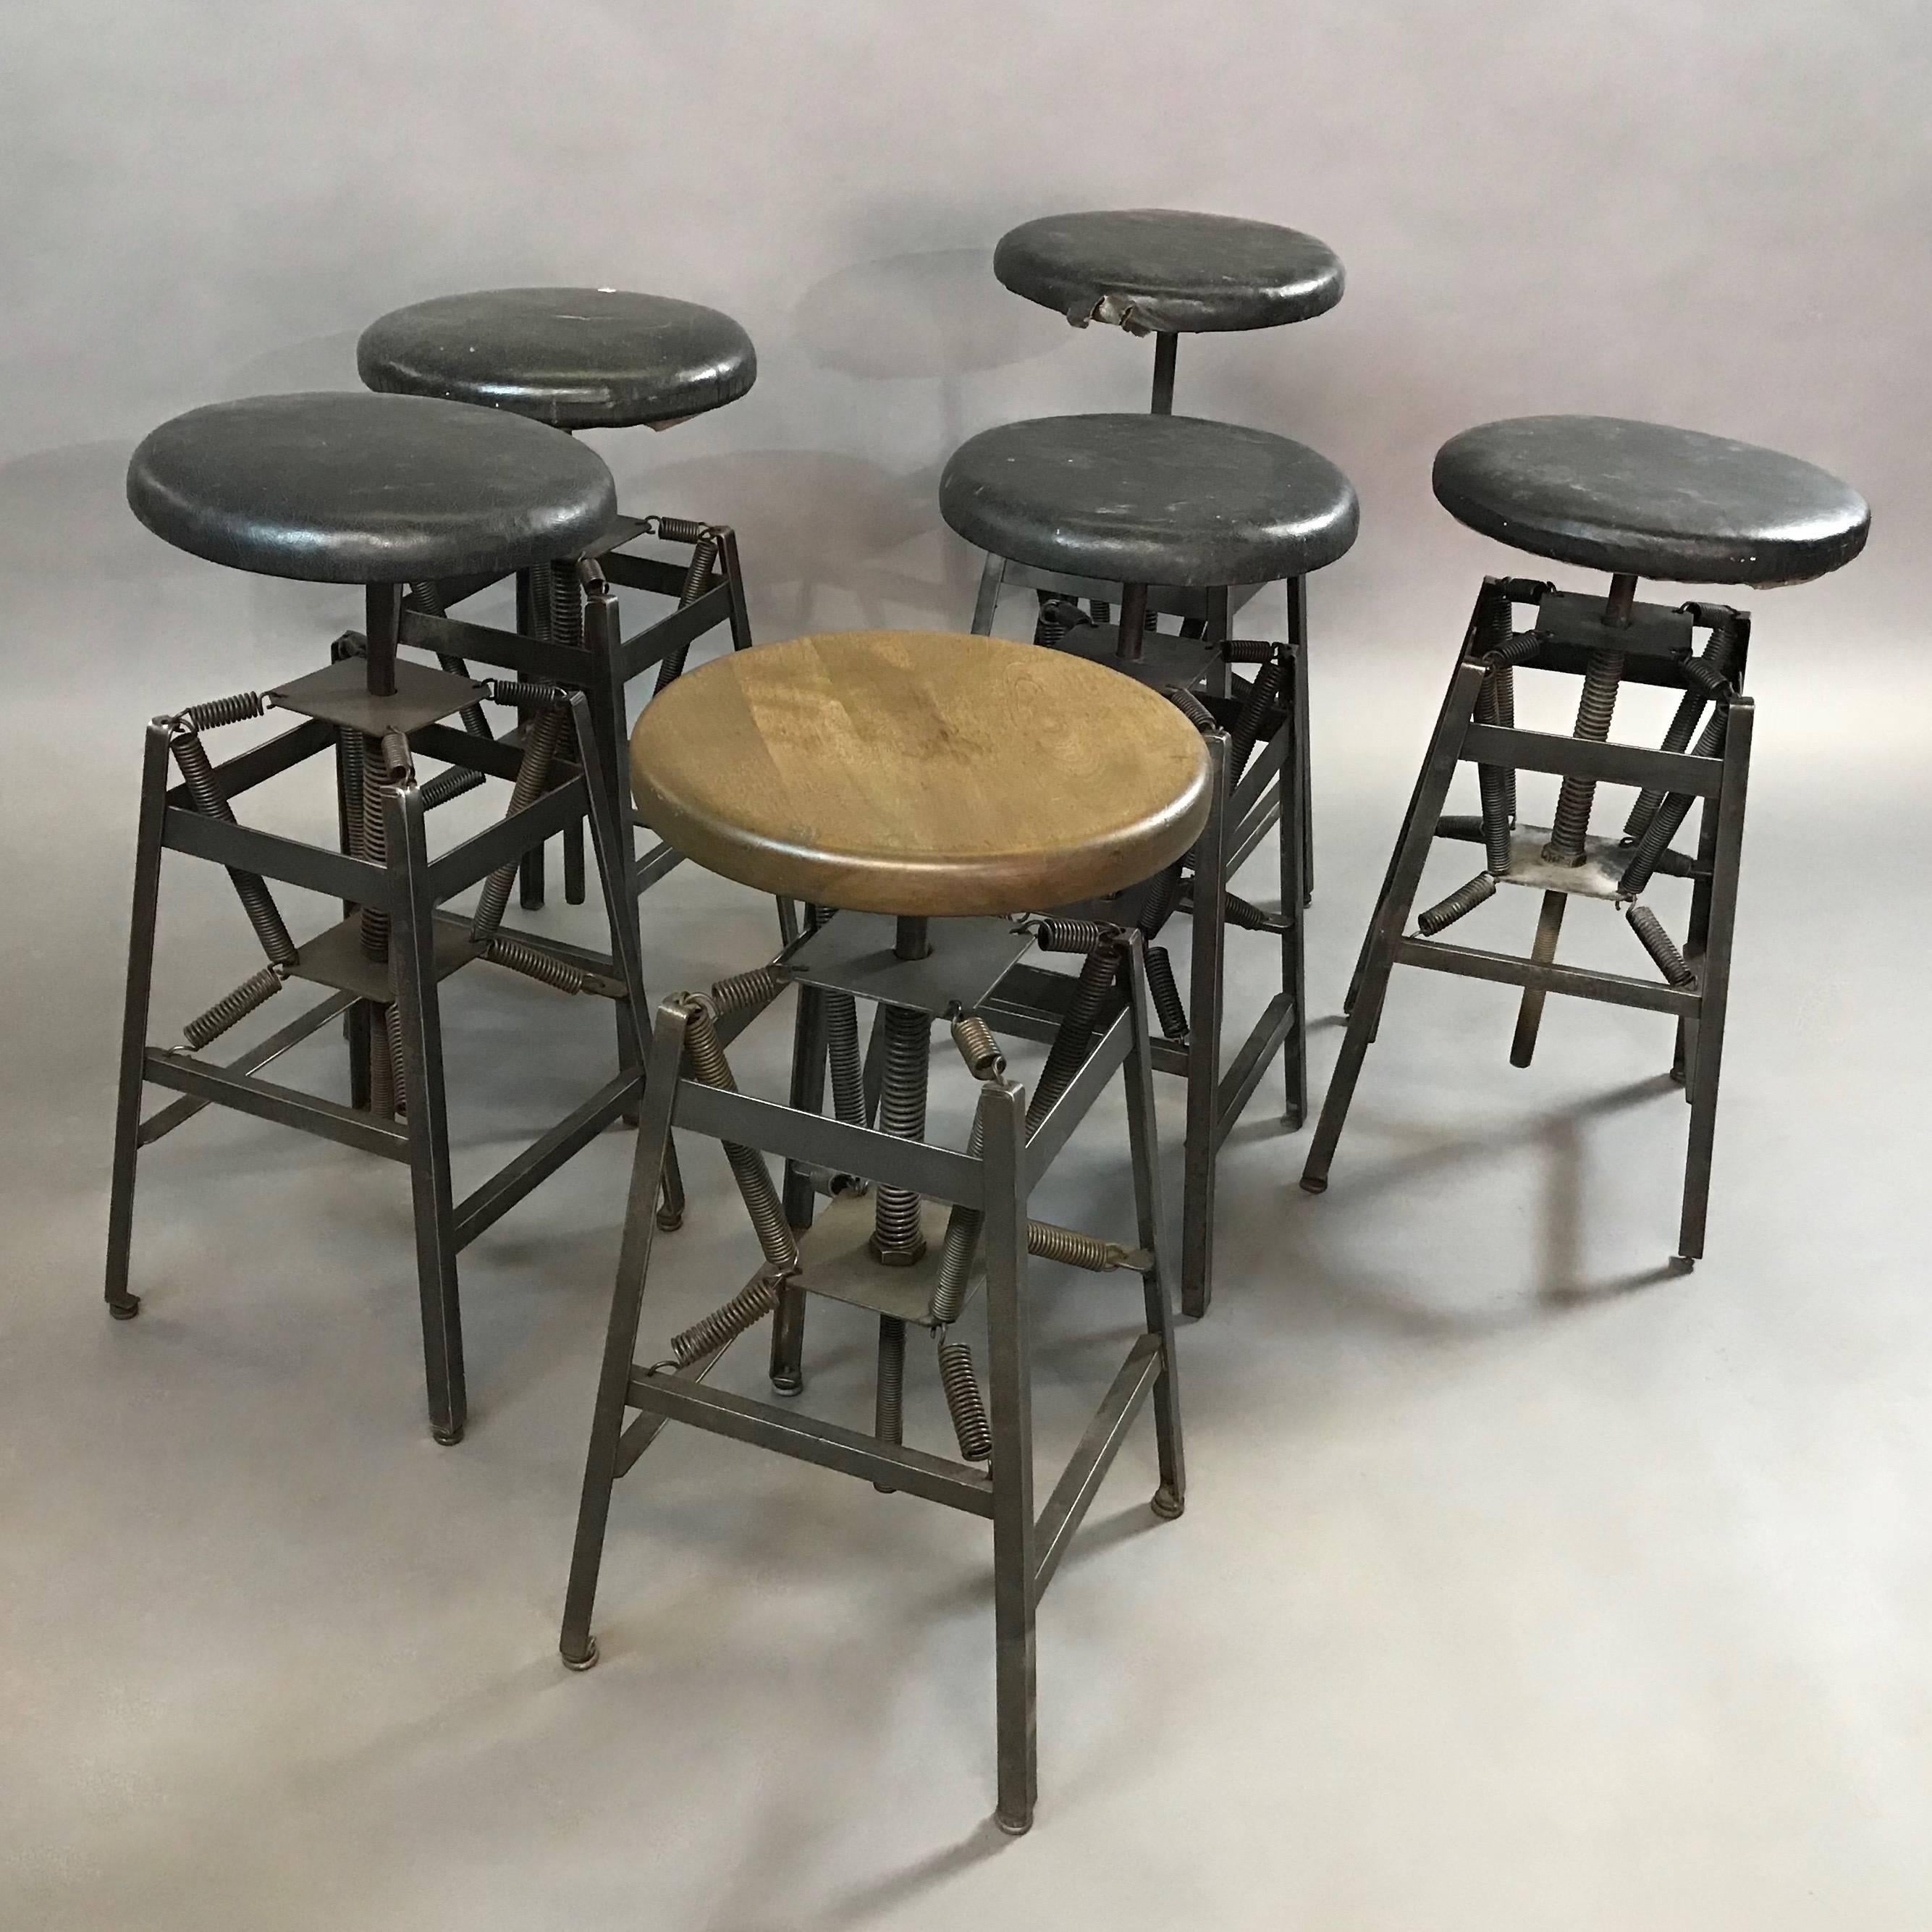 North American Industrial Adjustable Drafting Spring Stools by American Cabinet Co. For Sale